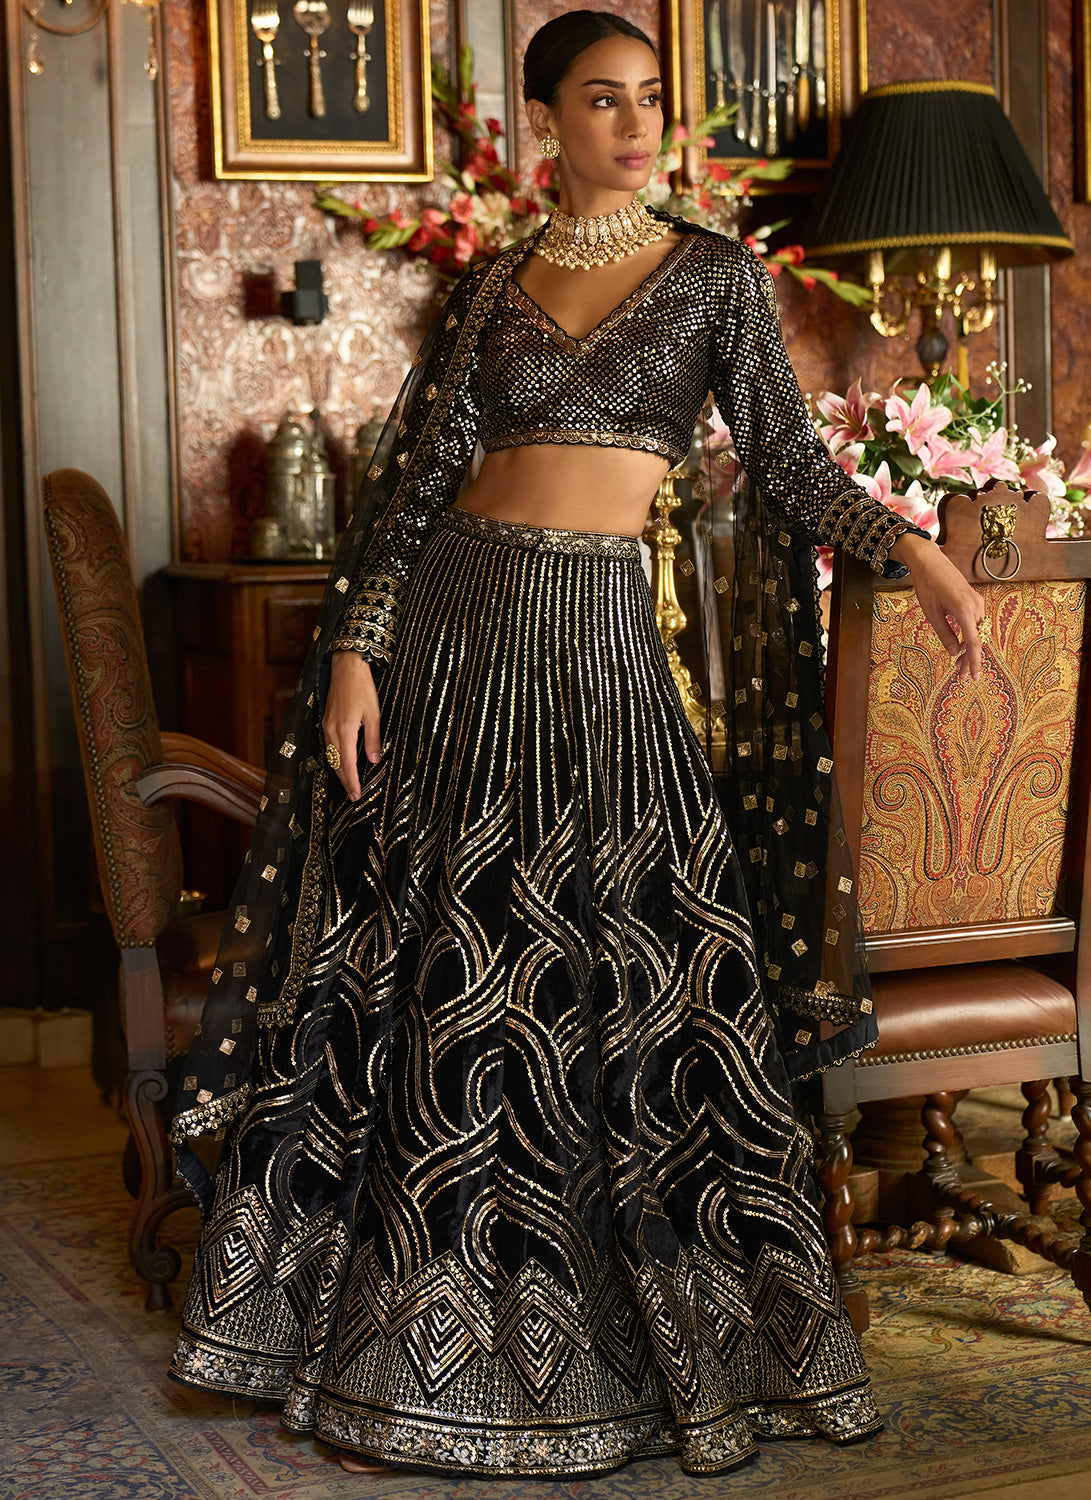 Silk Embroidered Skirt with Velvet Top | Posh Couture